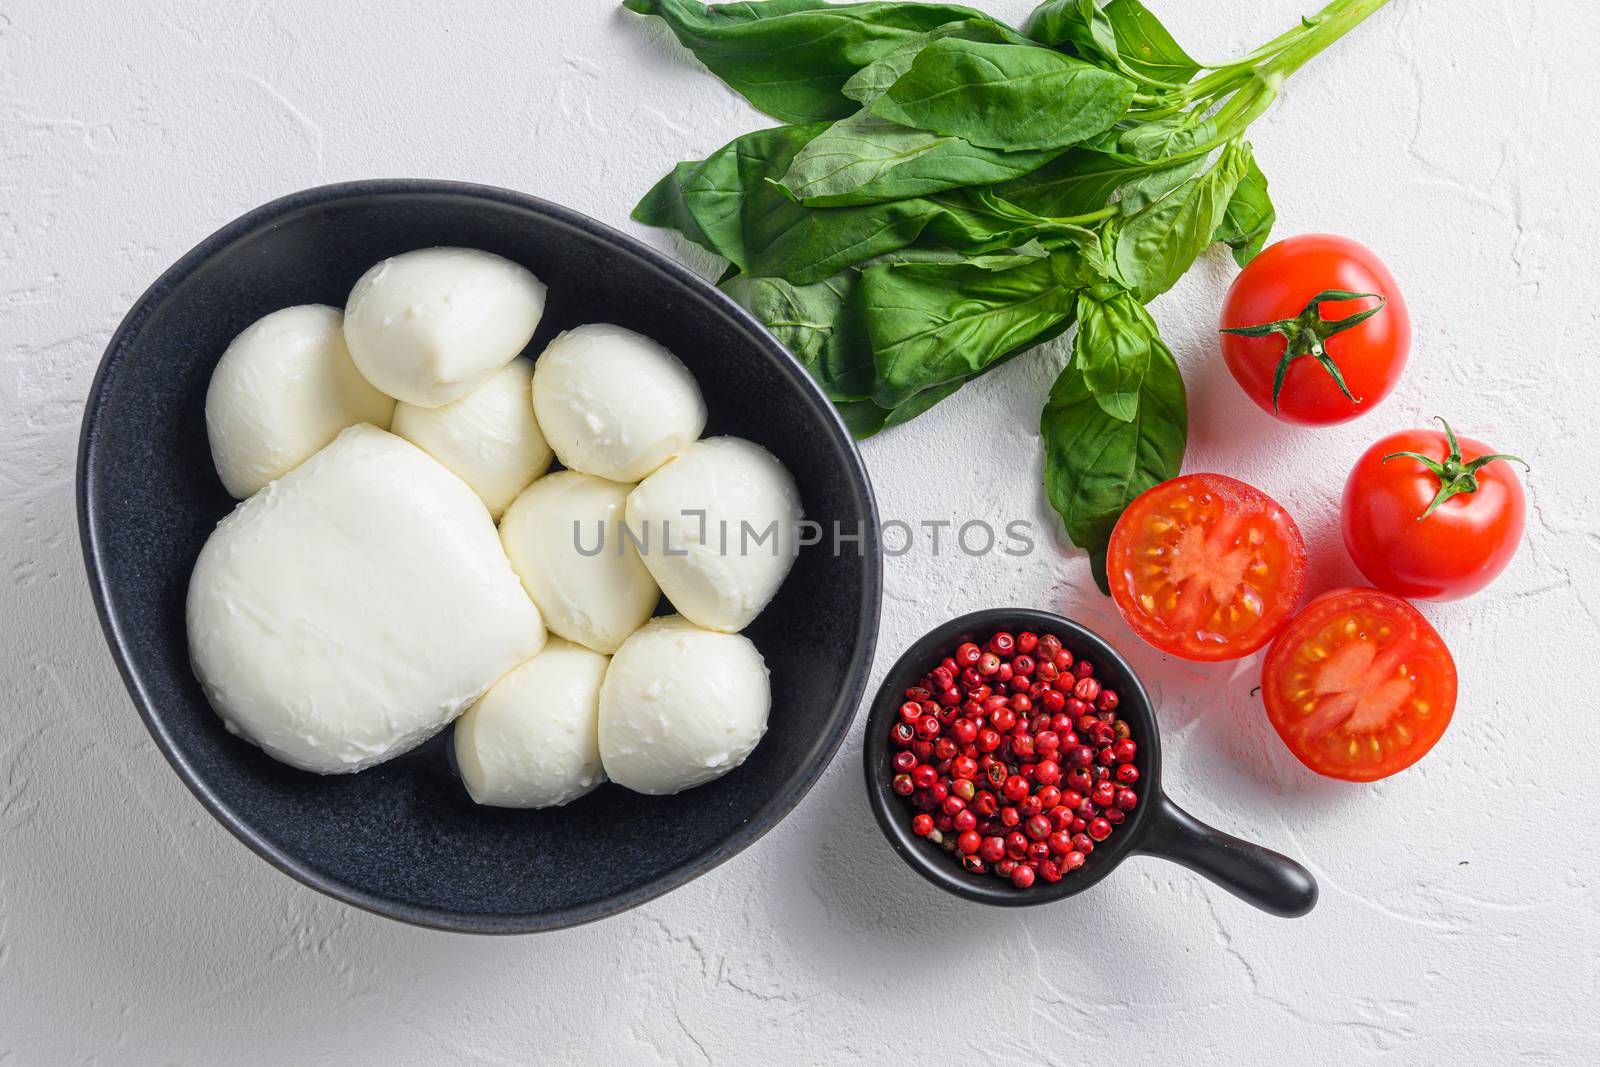 Mozzarella cheese balls with fresh basil leaves and cherry tomatoes, the ingredients of the Italian Caprese salad, on white background overhead photo by Ilianesolenyi